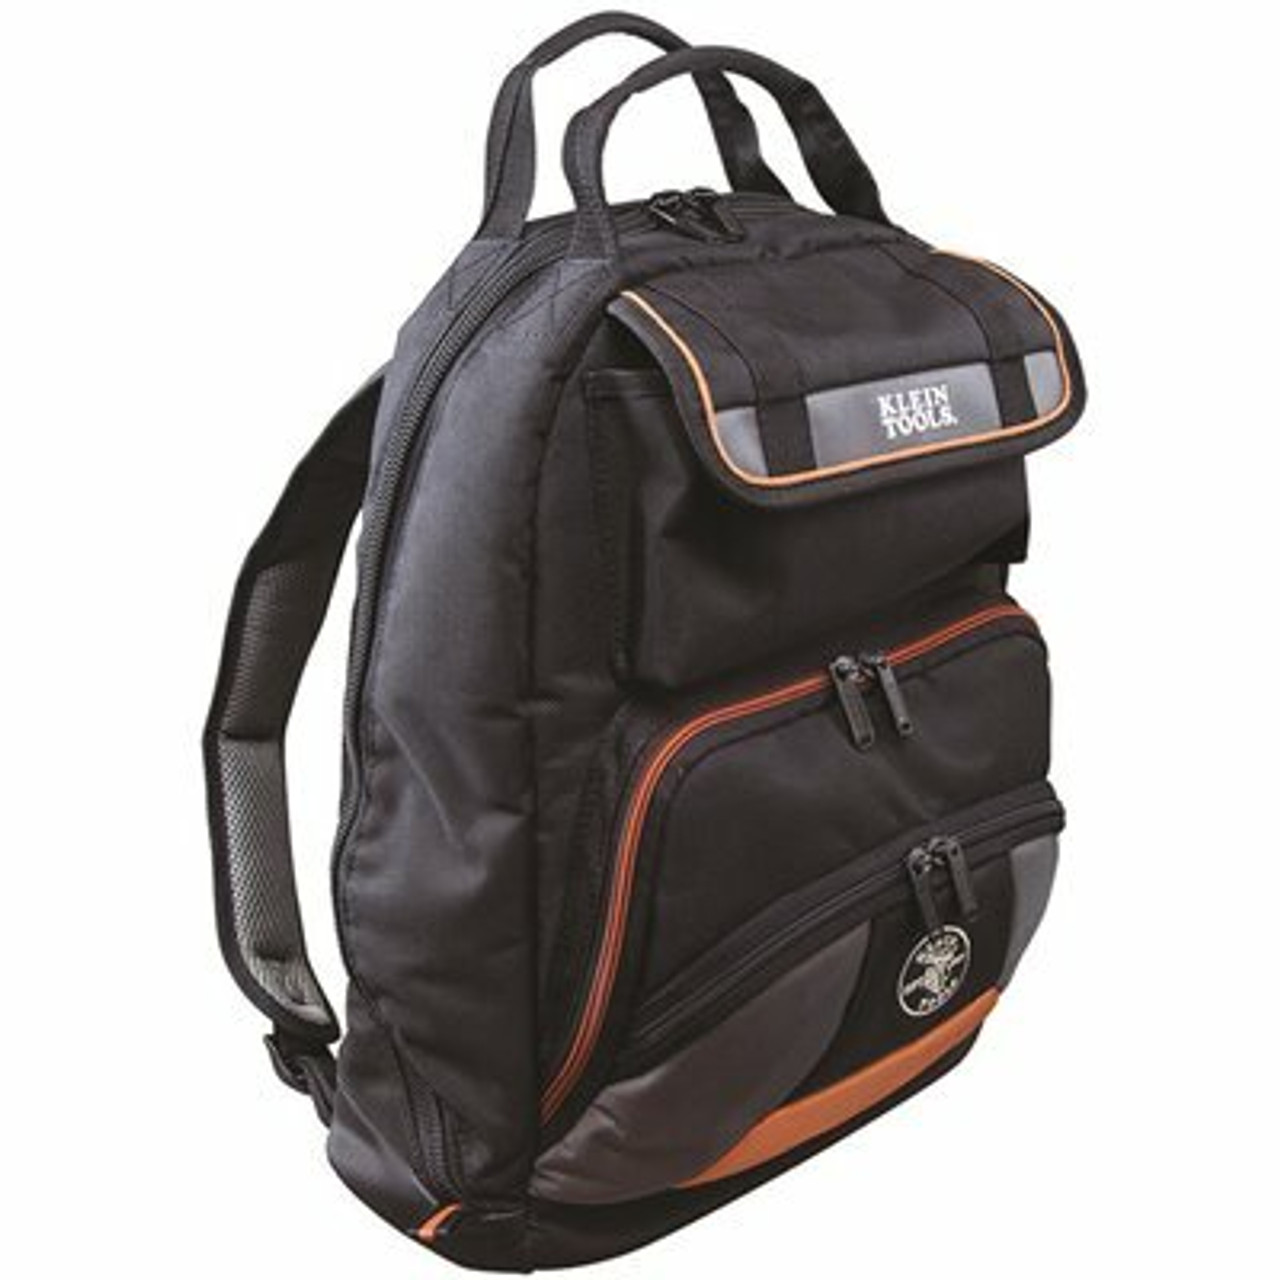 Klein Tools Tradesman Pro 17.5 In. Tool Gear Back Pack